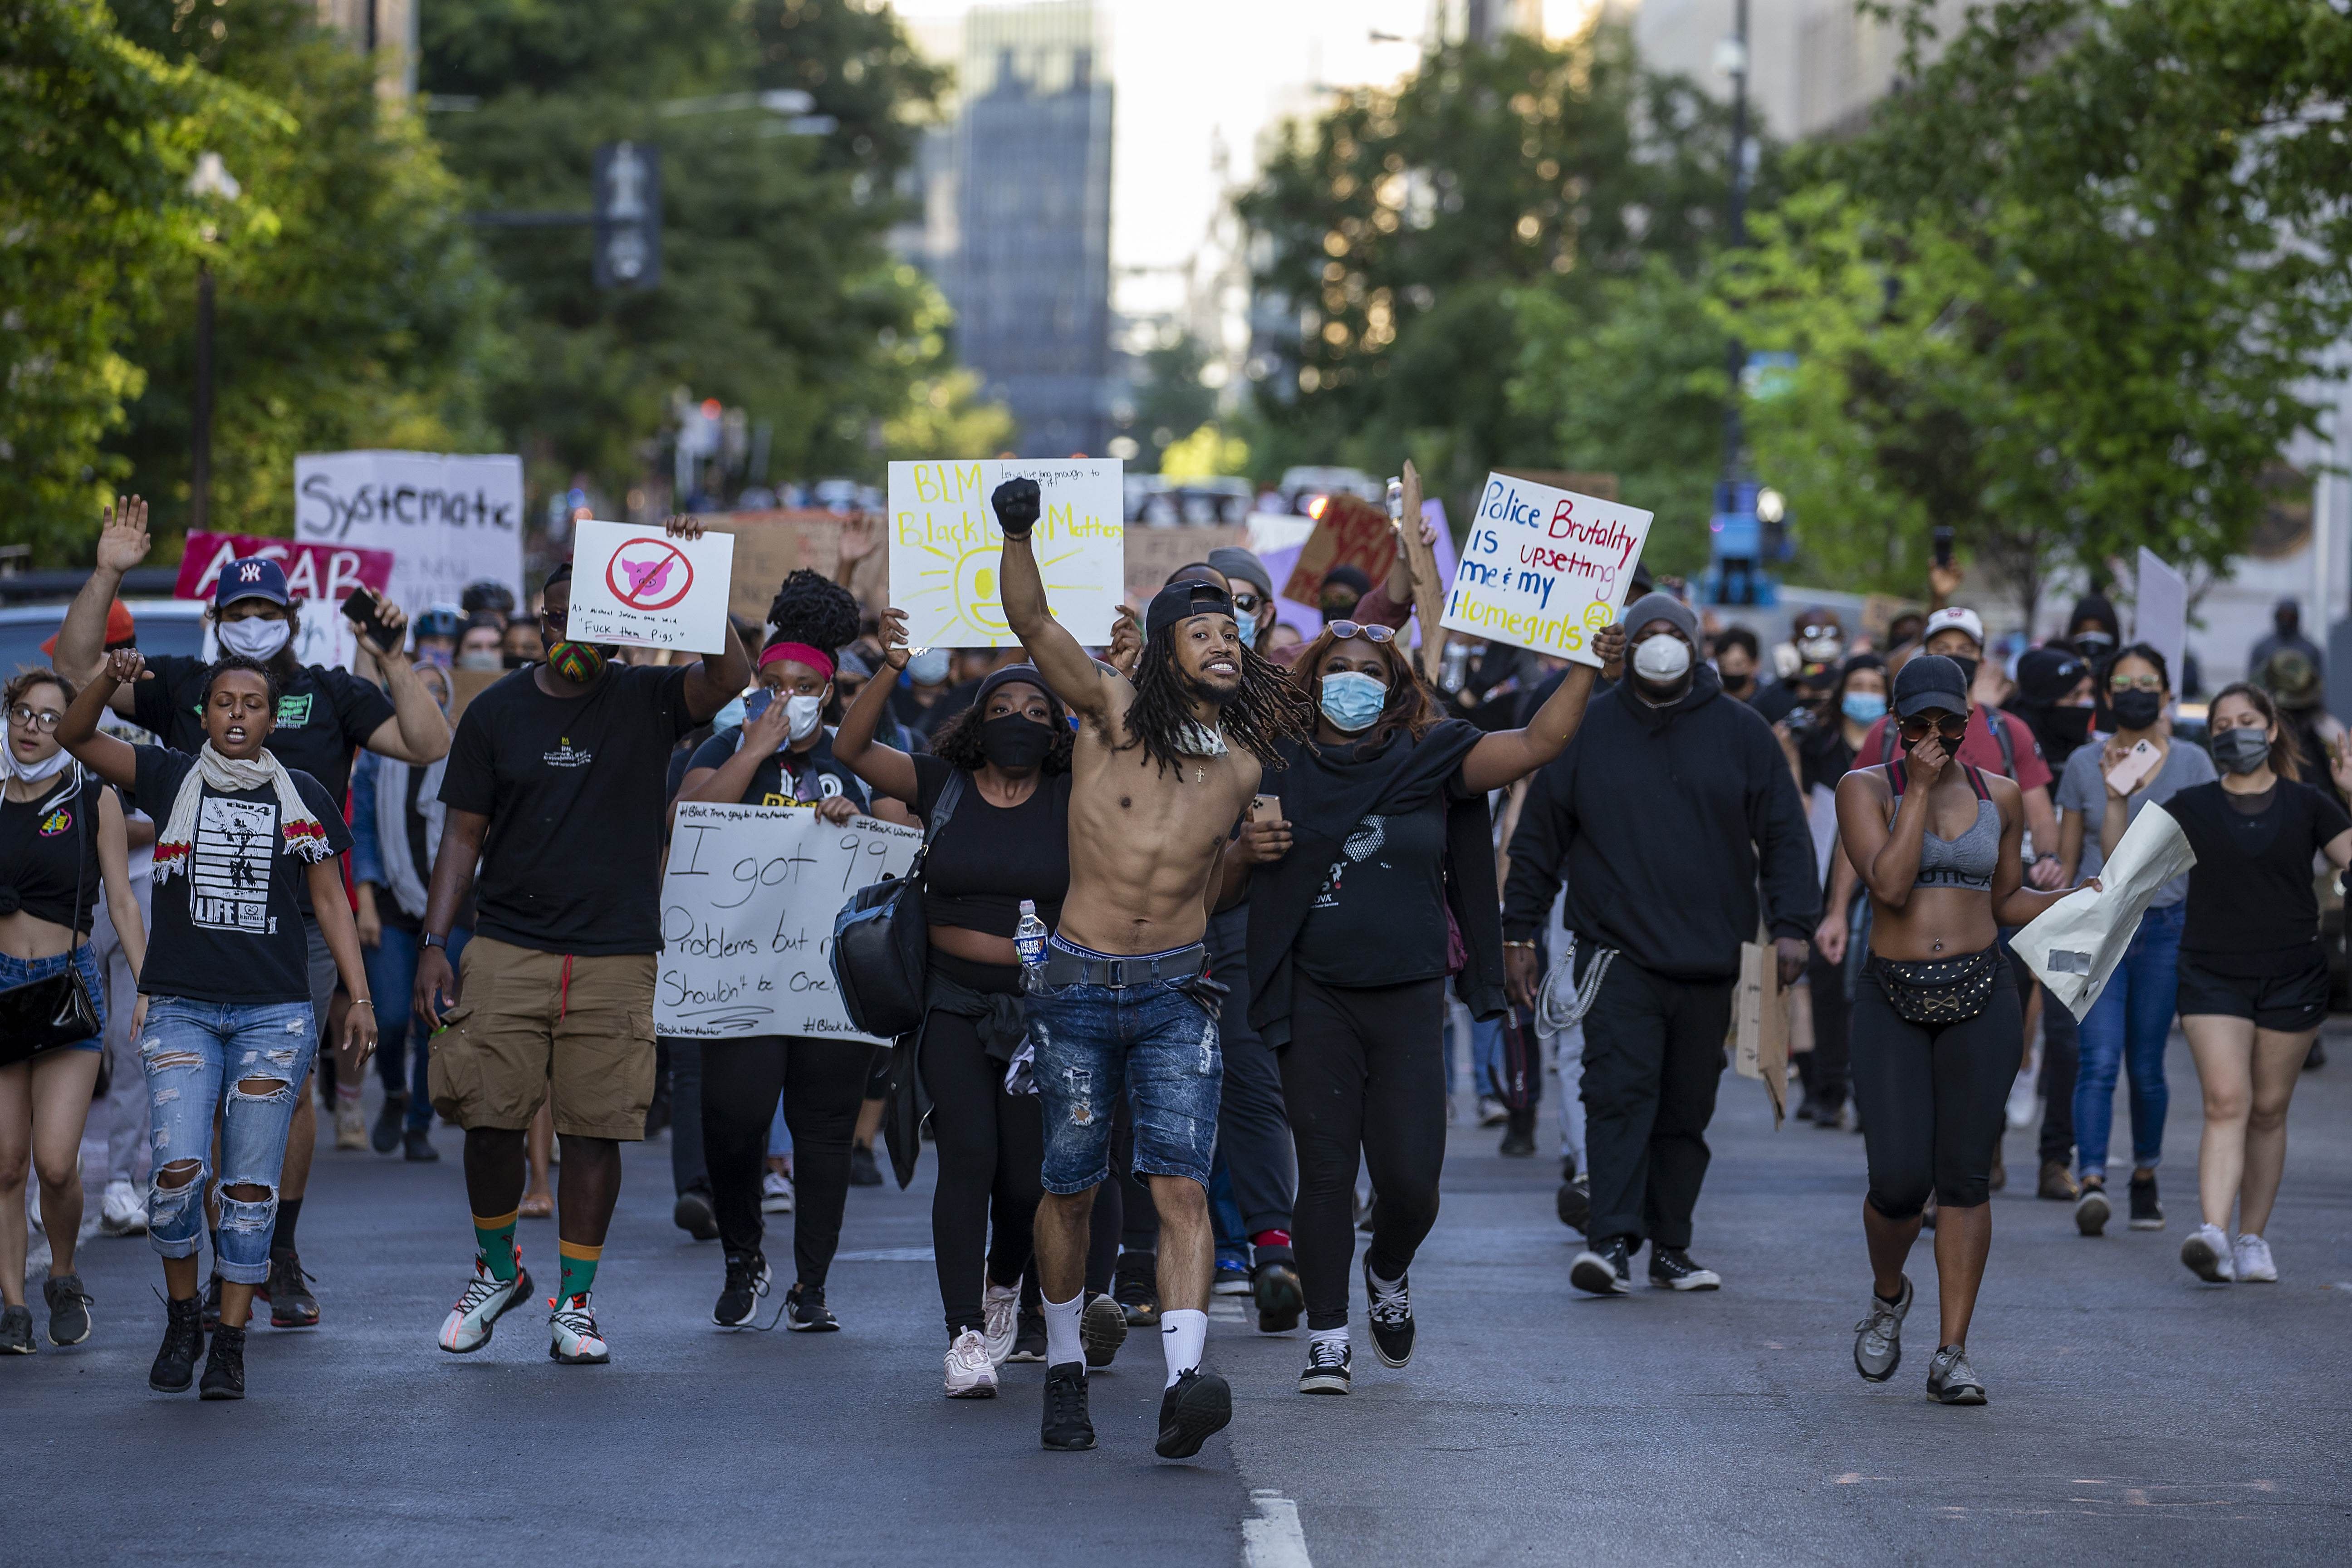 Across the country, protests were set off by the recent death of George Floyd in Minneapolis, Minnesota while in police custody, the most recent in a series of deaths of black Americans by the police. Minneapolis police officer Derek Chauvin was taken into custody and charged with third-degree murder and manslaughter. (Credit: Getty Images/AFP)